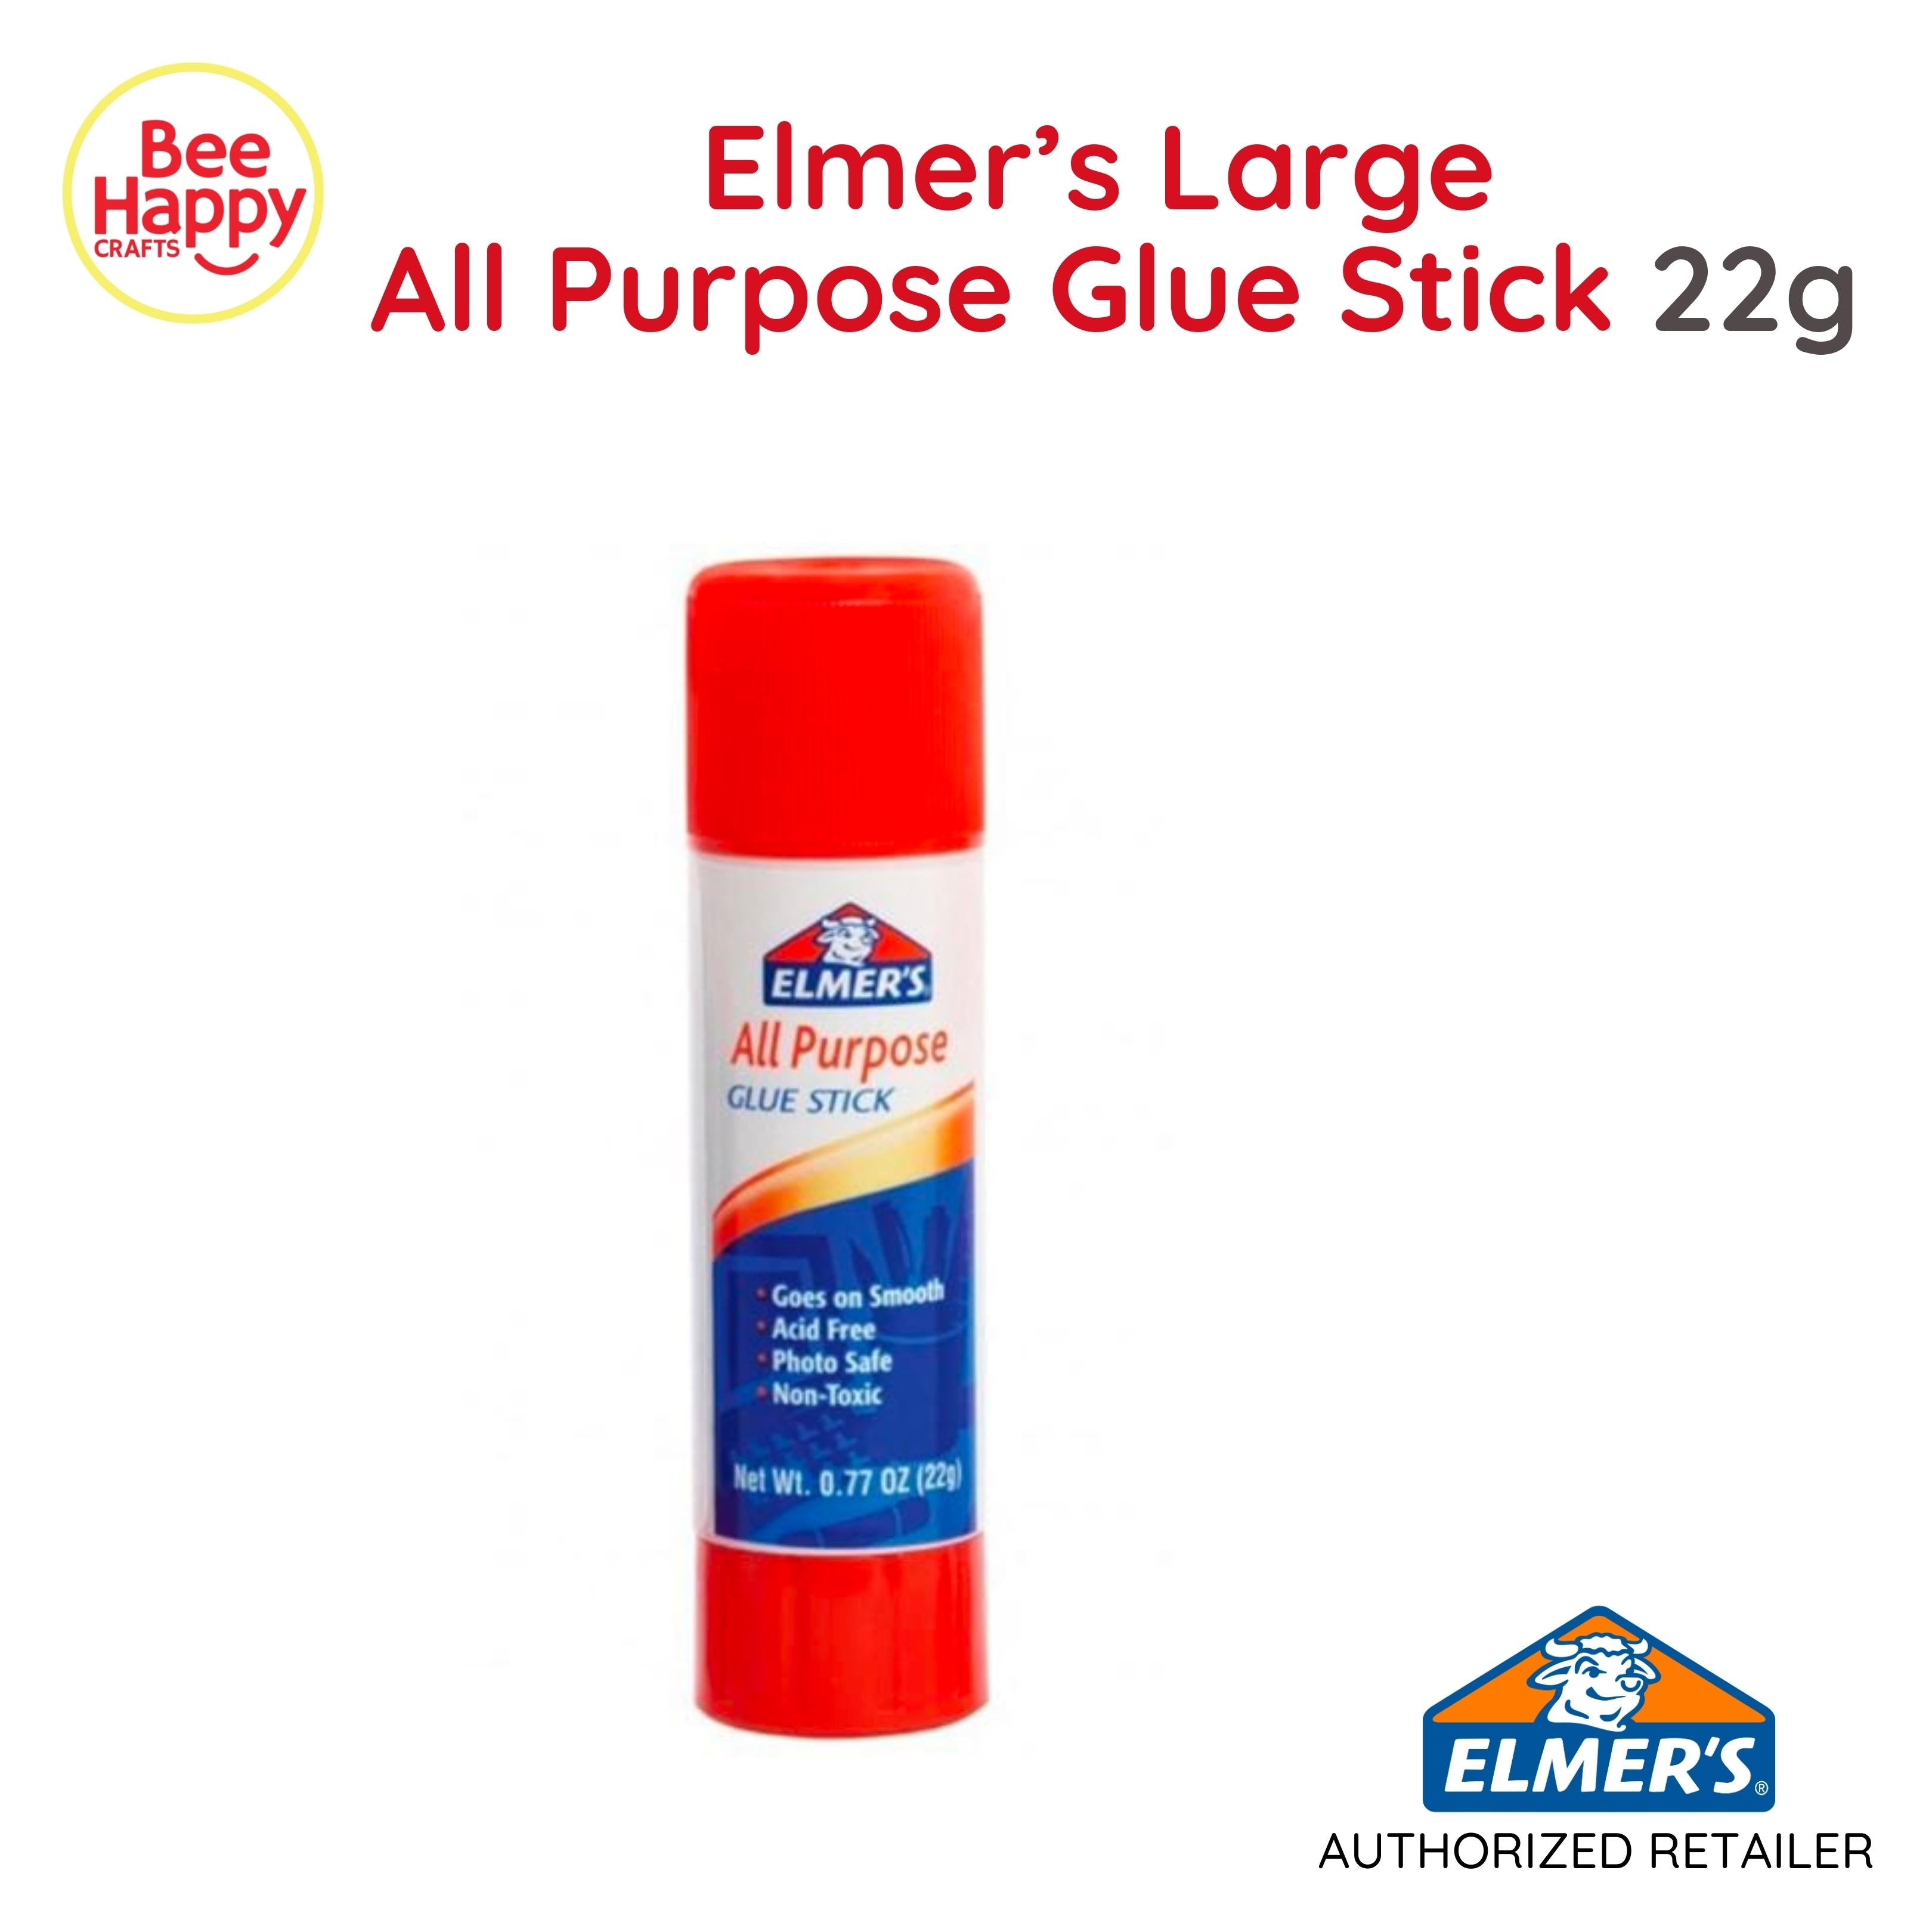 Shop elmer's glue stick for Sale on Shopee Philippines